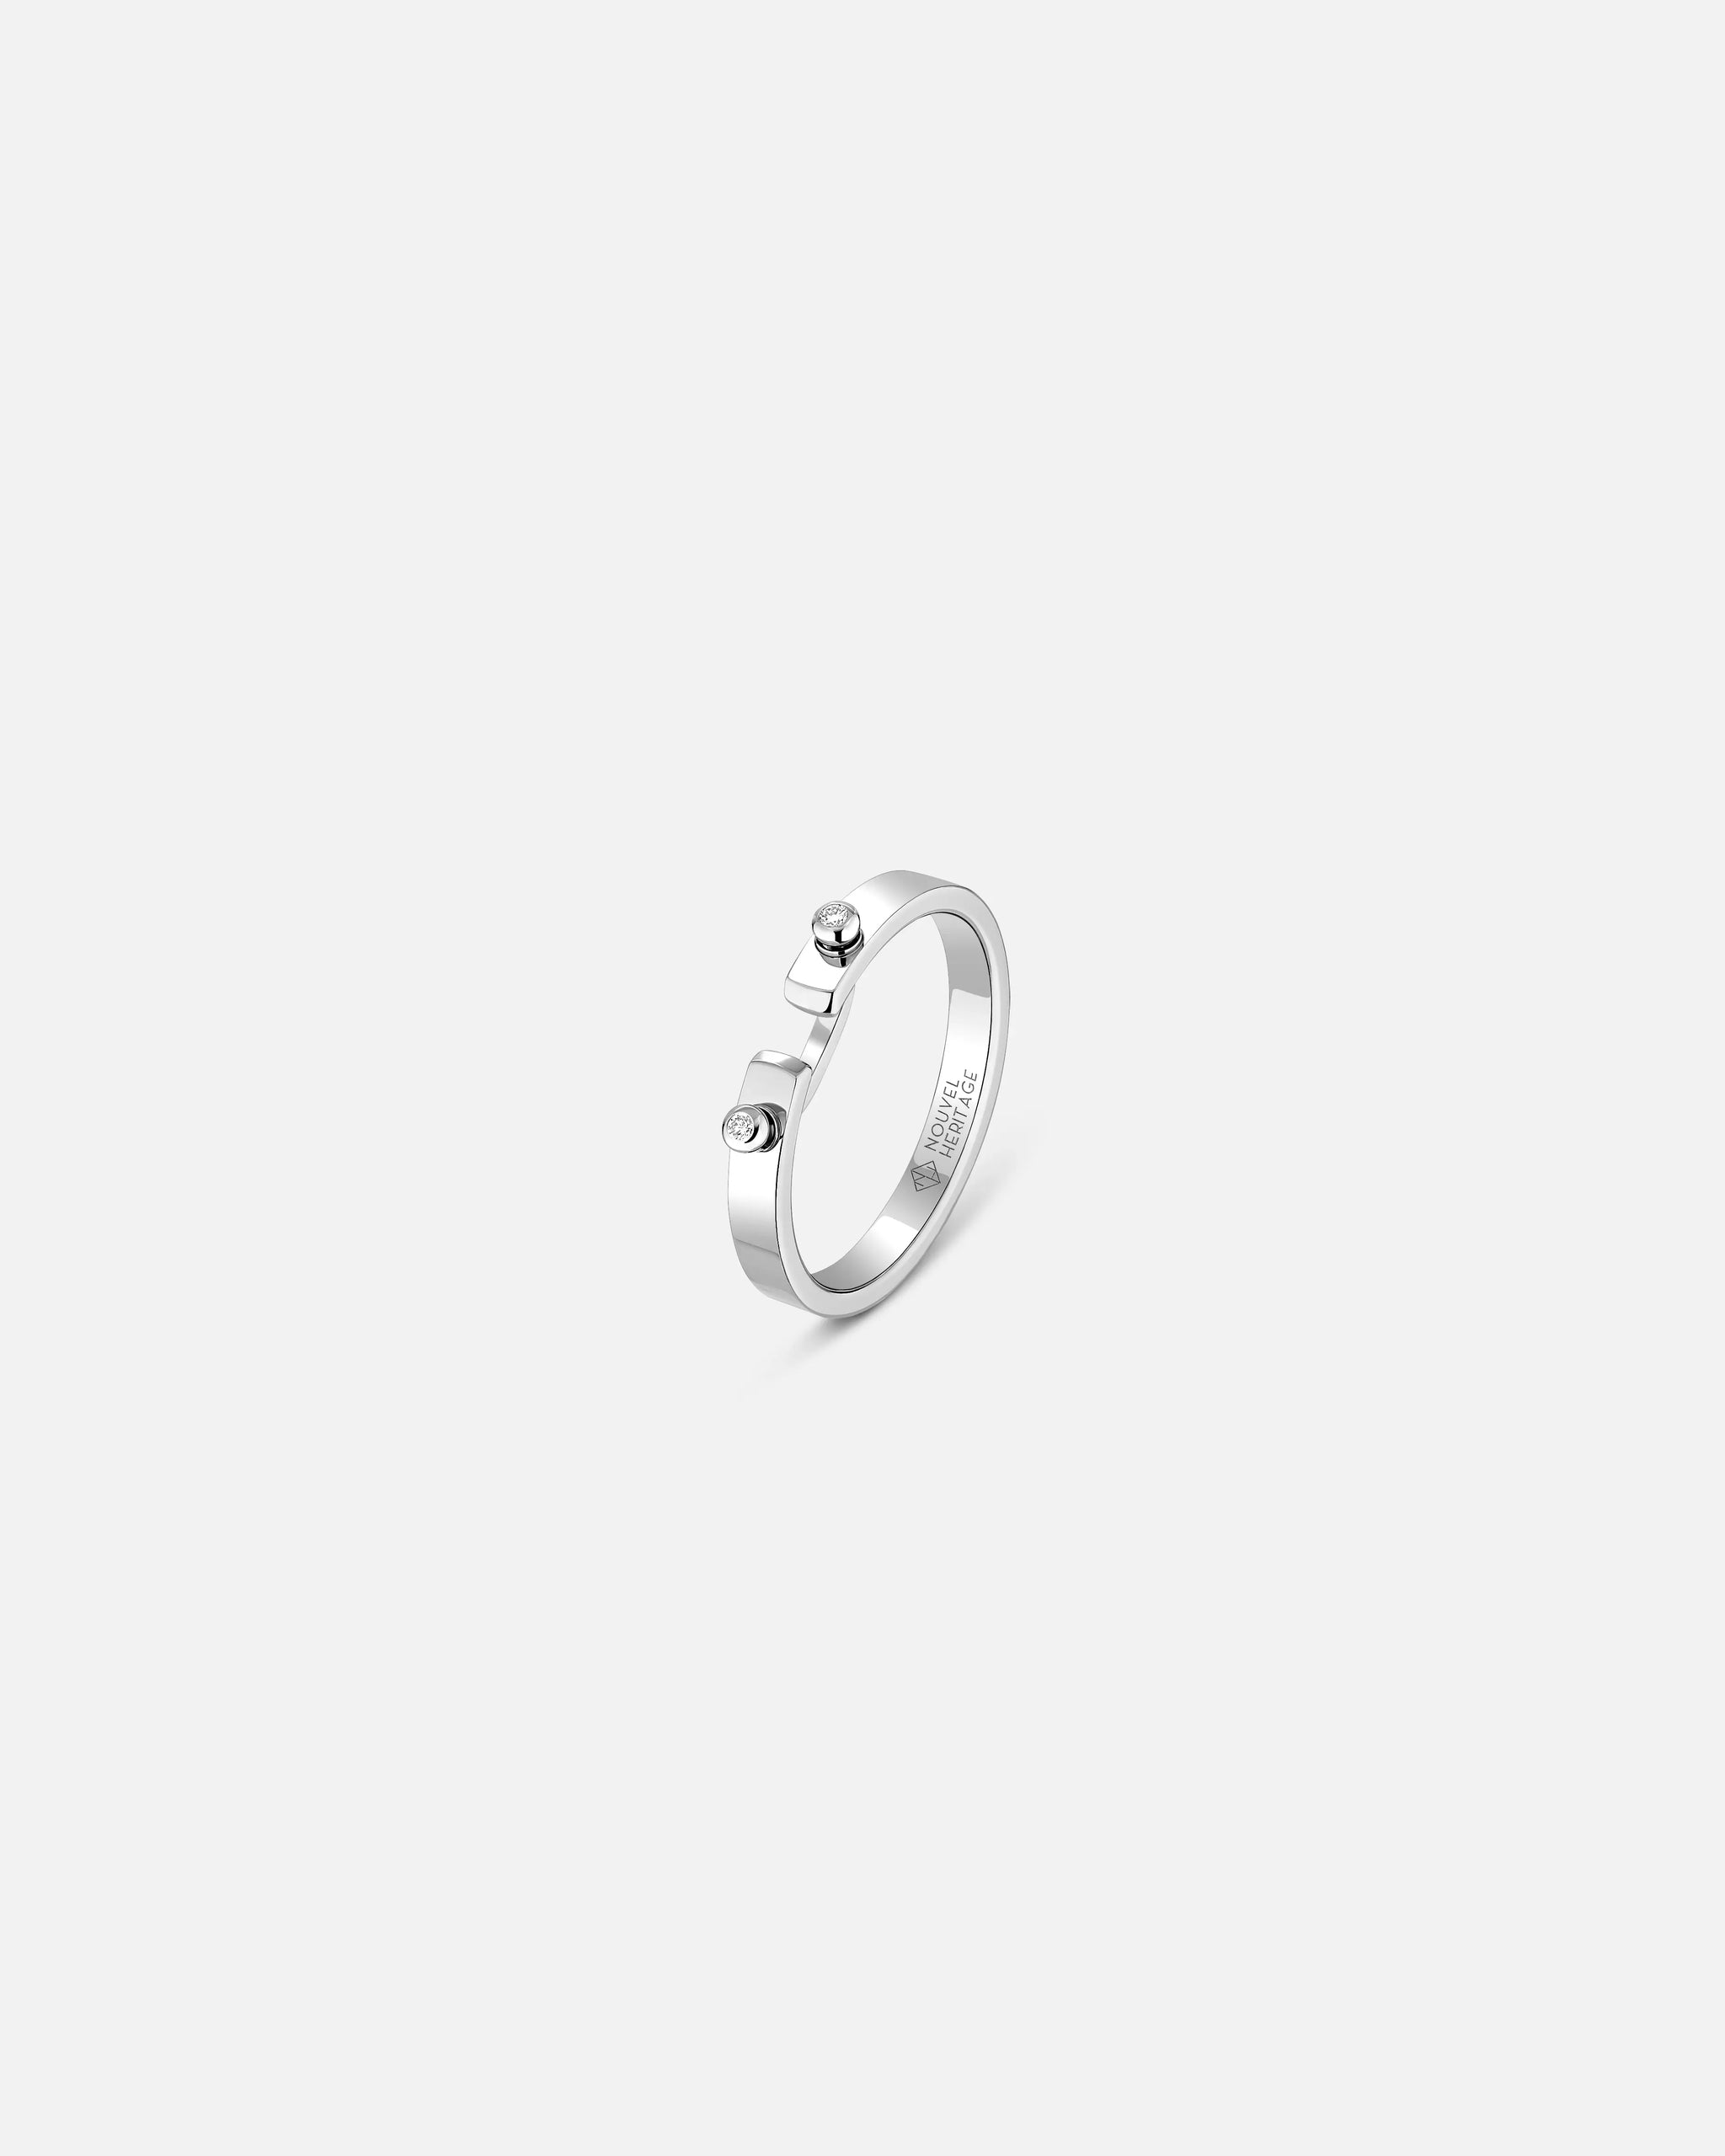 Monday Morning PM Mood Ring in White Gold - 1 - Nouvel Heritage